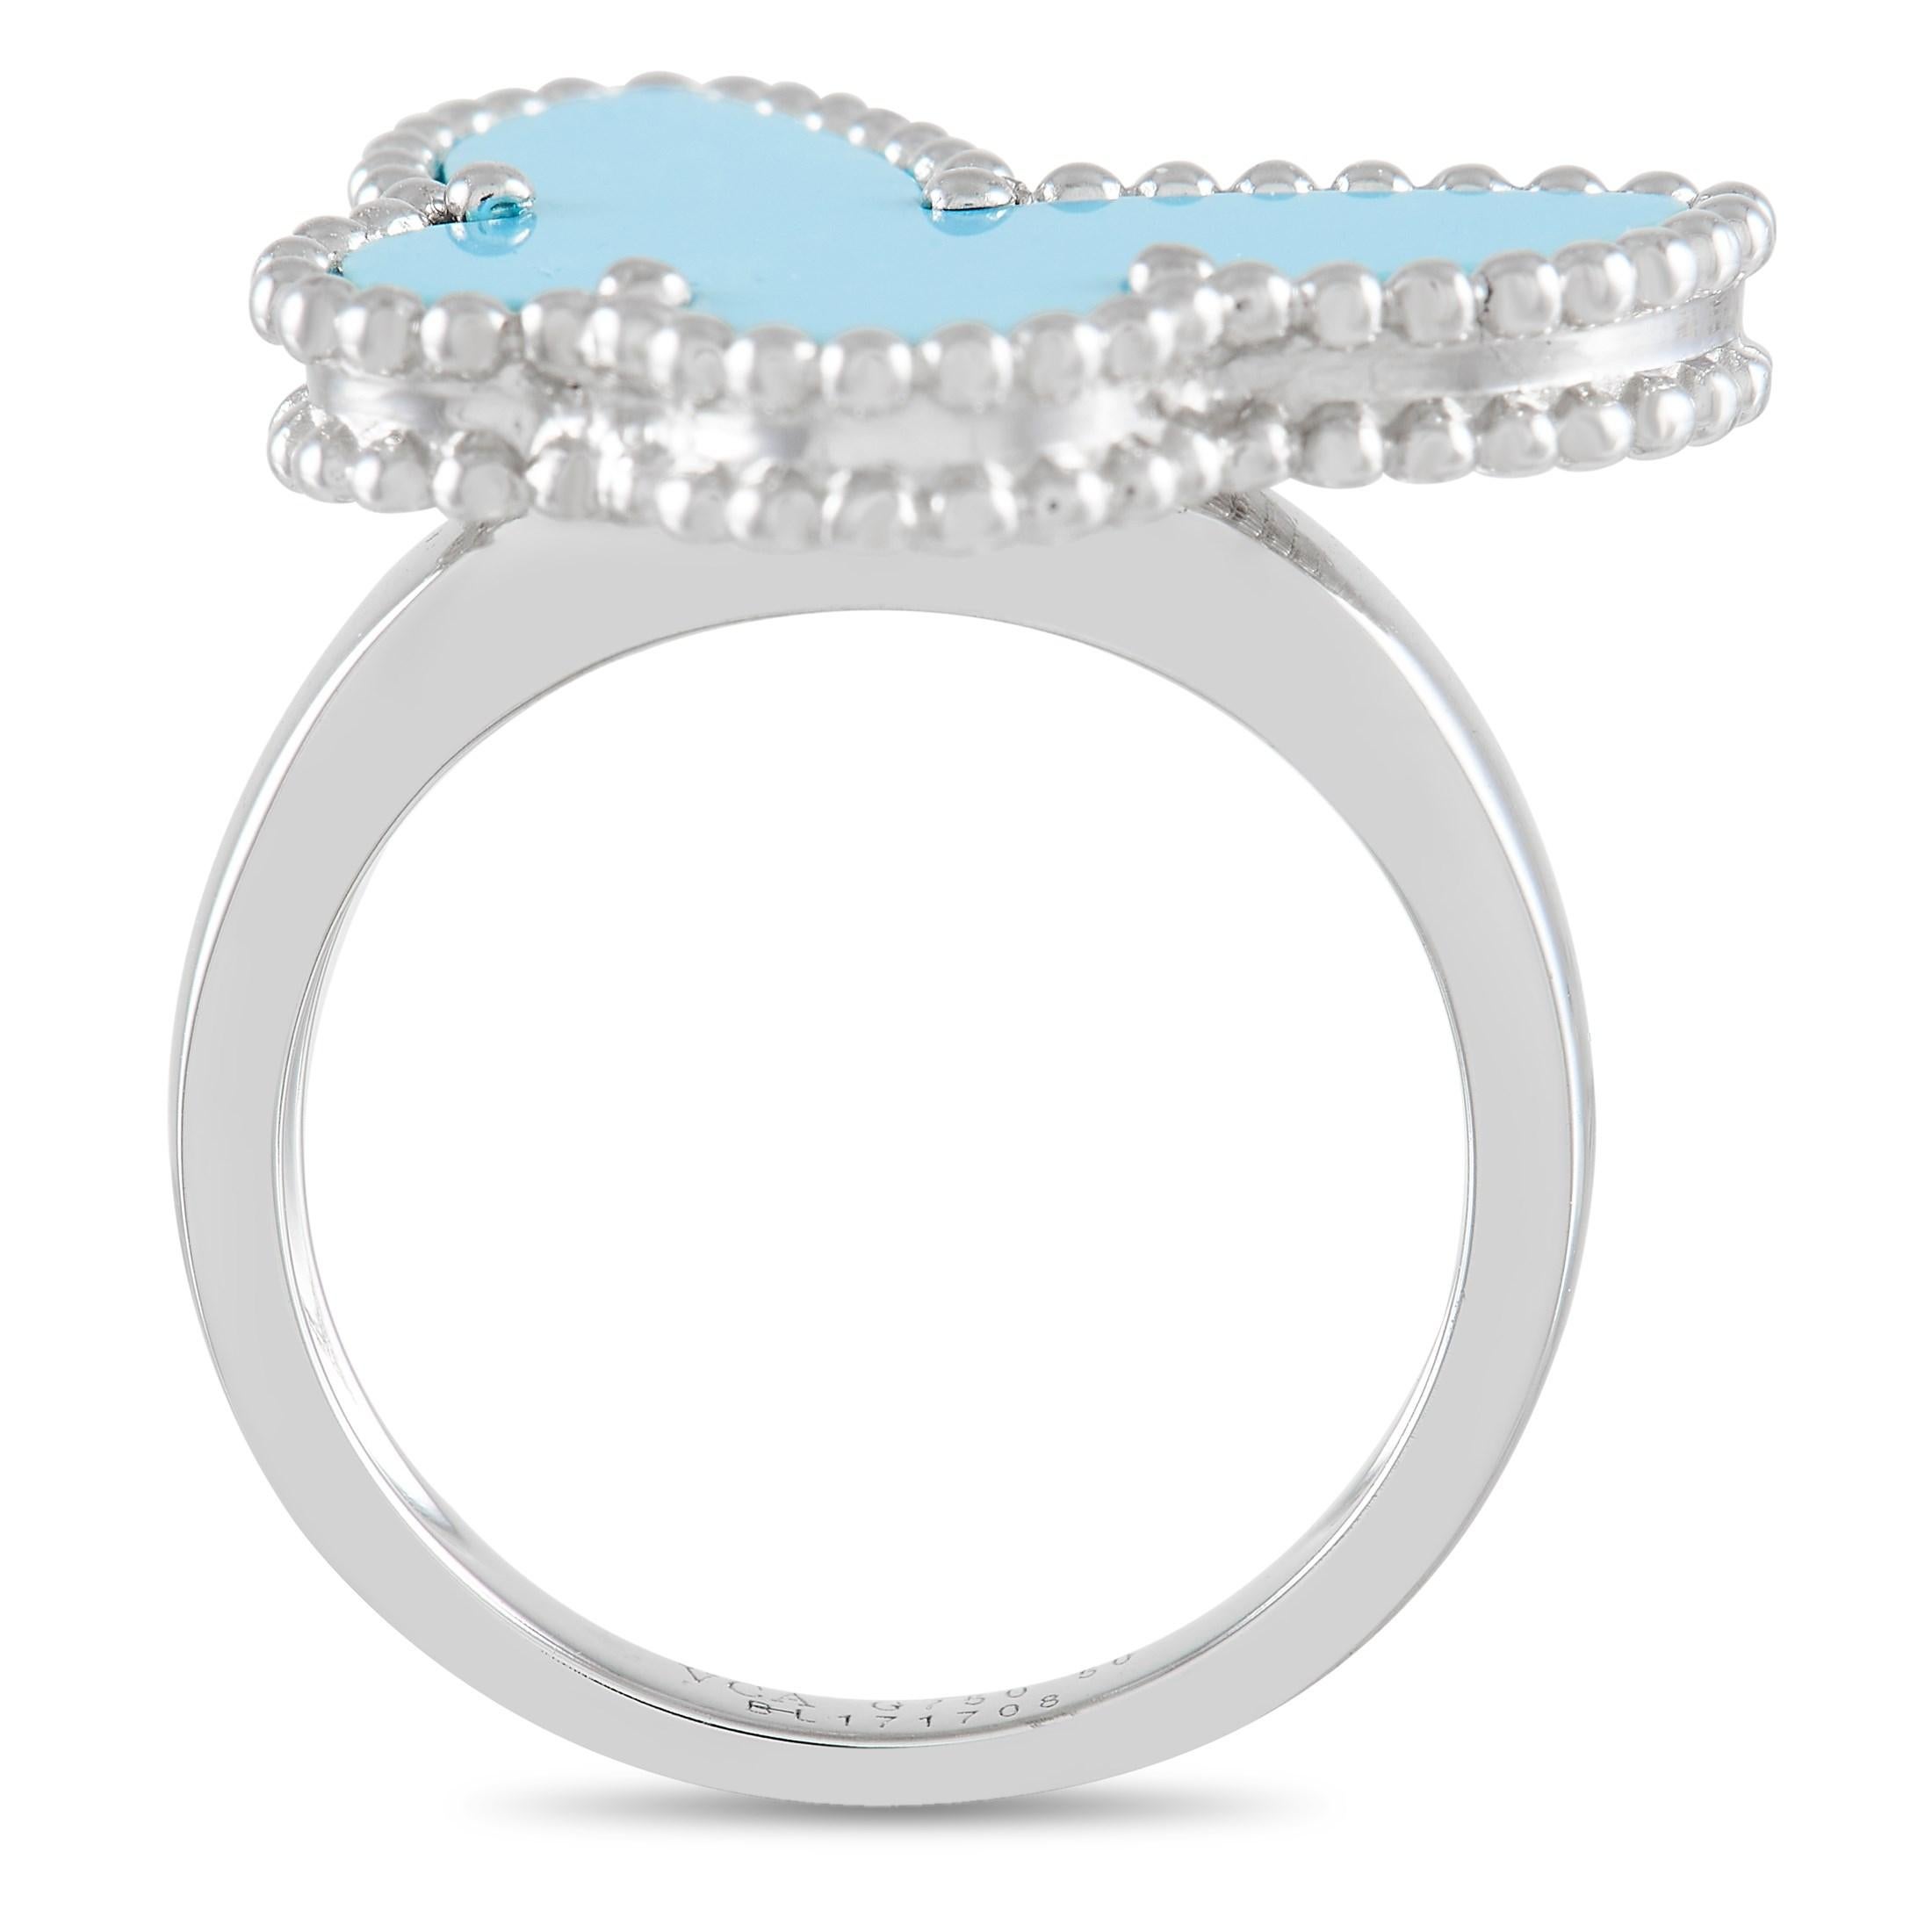 A breathtaking butterfly symbol makes a statement at the center of this captivating Van Cleef & Arpels Lucky Alhambra ring. The stunning turquoise gemstone contrasts beautifully against the 18K White Gold metalwork. Featuring a 2mm wide band and a